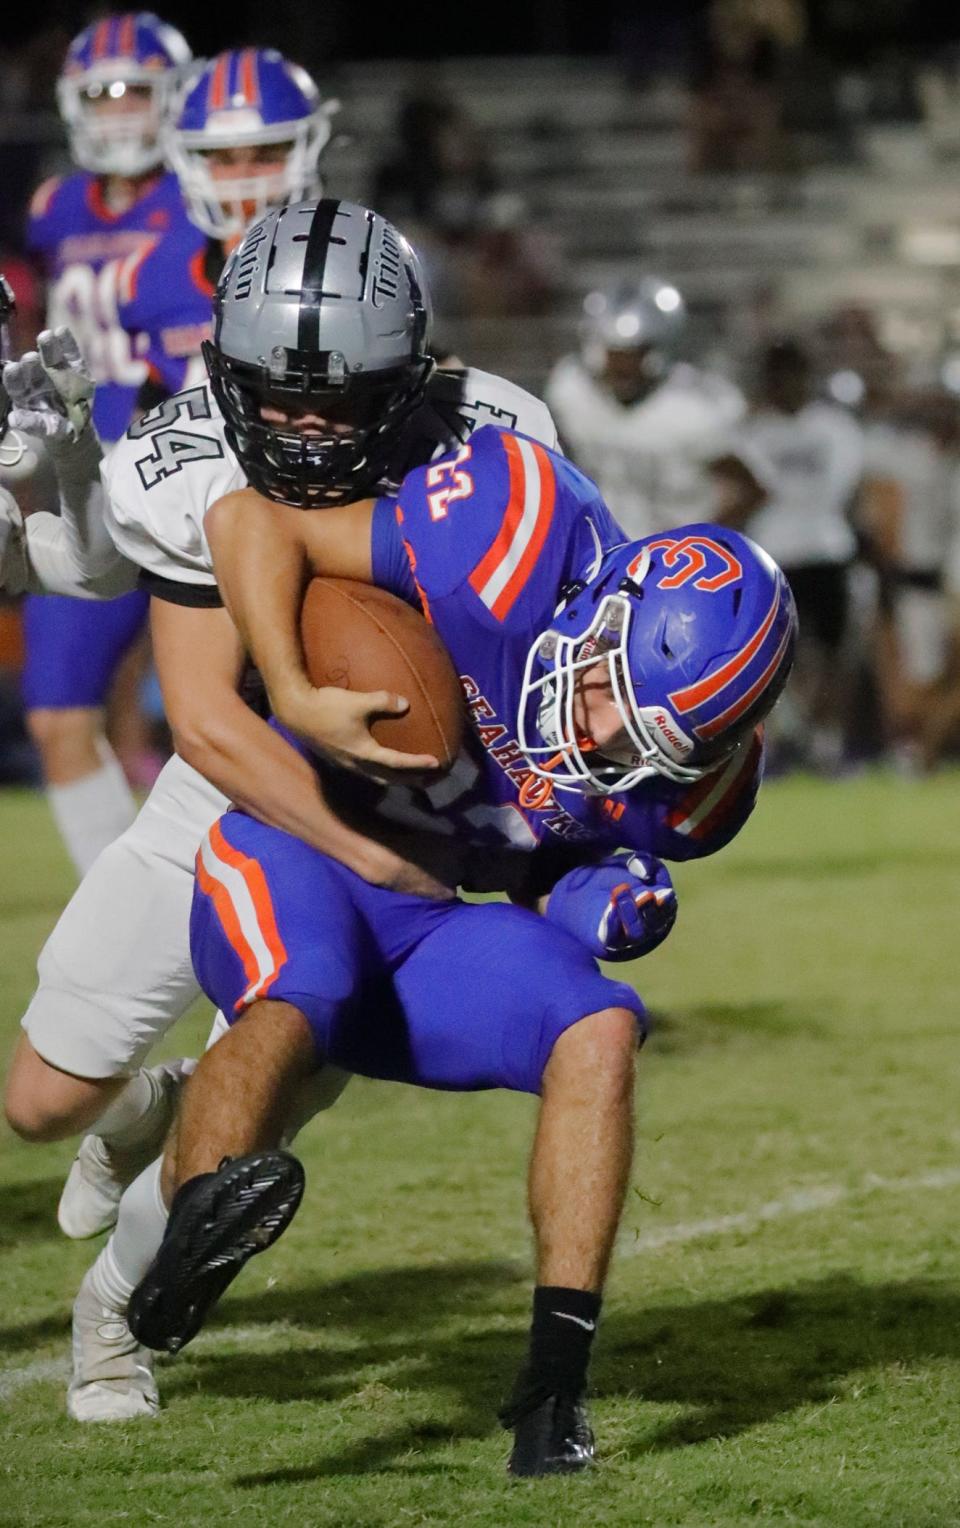 Defensive player Karson Long tackles rusher Damien Miranda during their matchup.The Mariner Tritons visited the Cape Coral High School Seahawks Thursday, October 27, 2022 in a rivalry matchup.